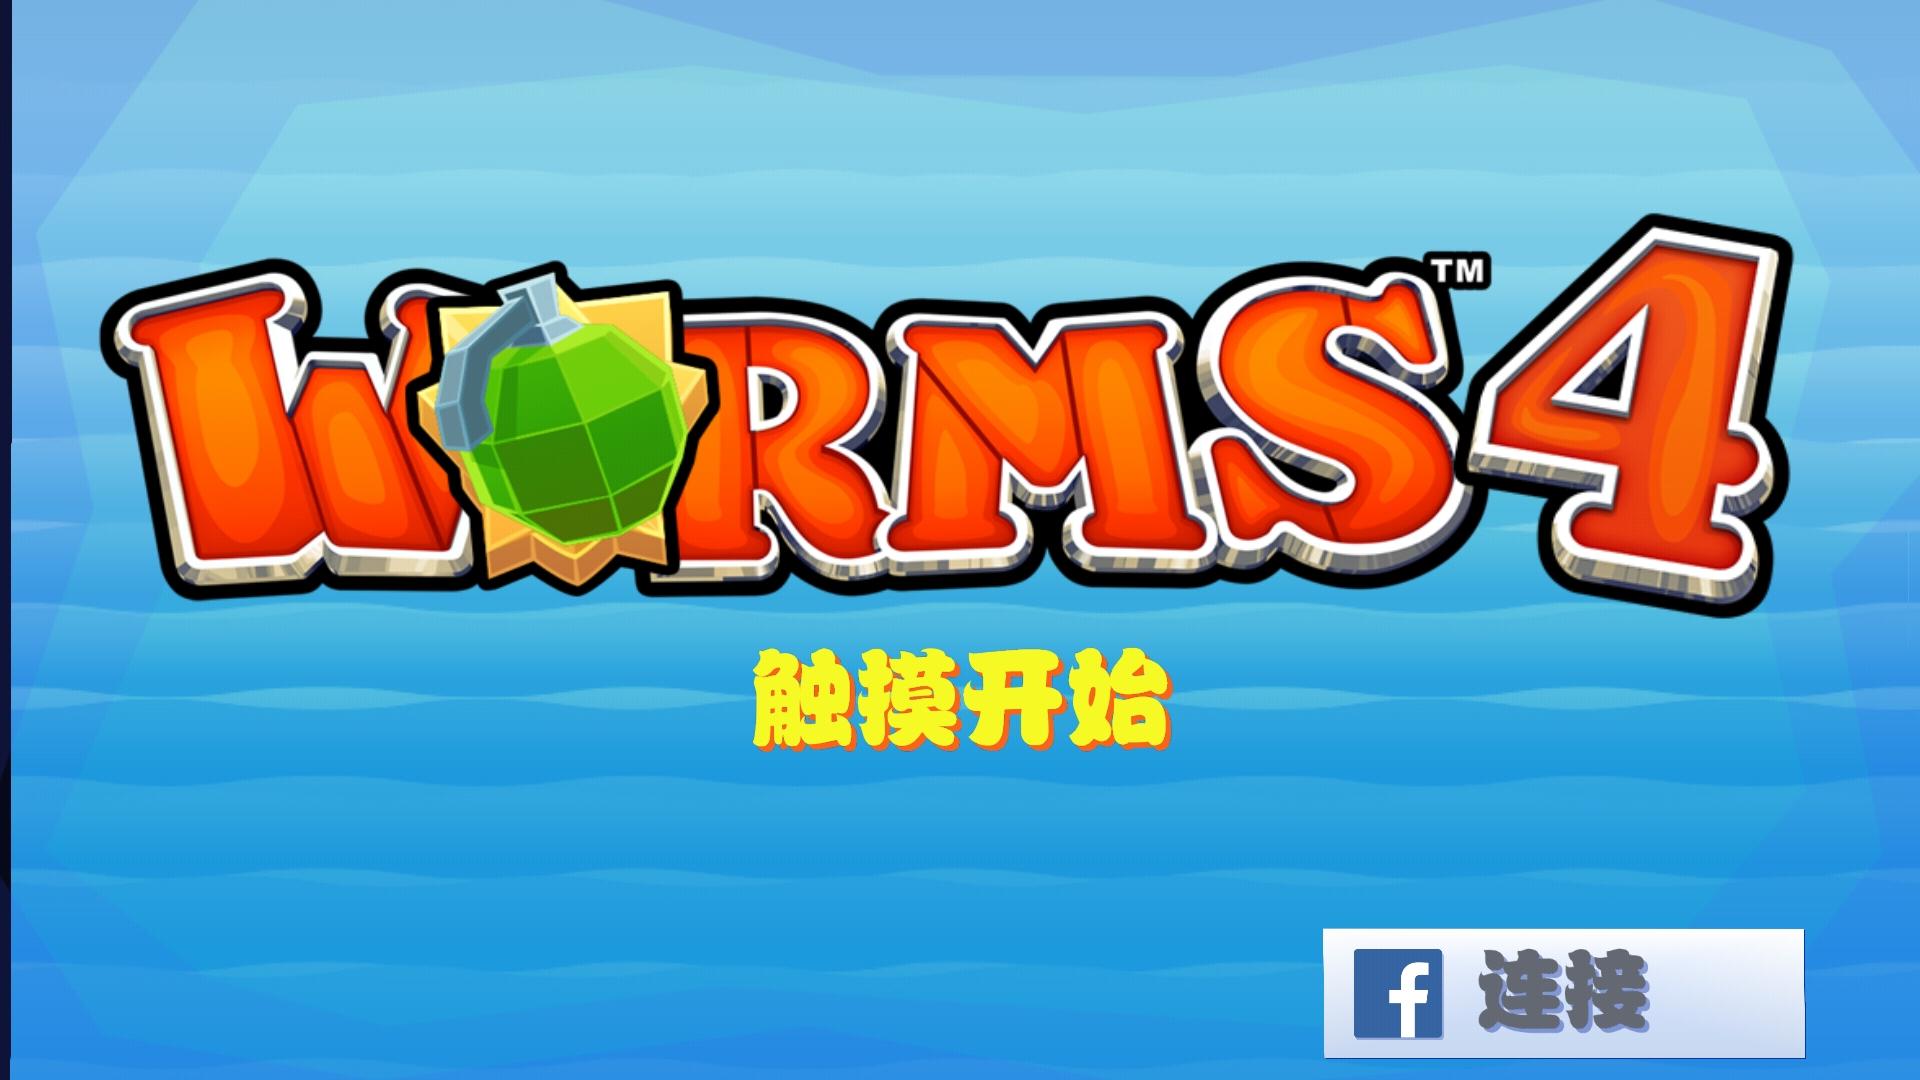 Worms4